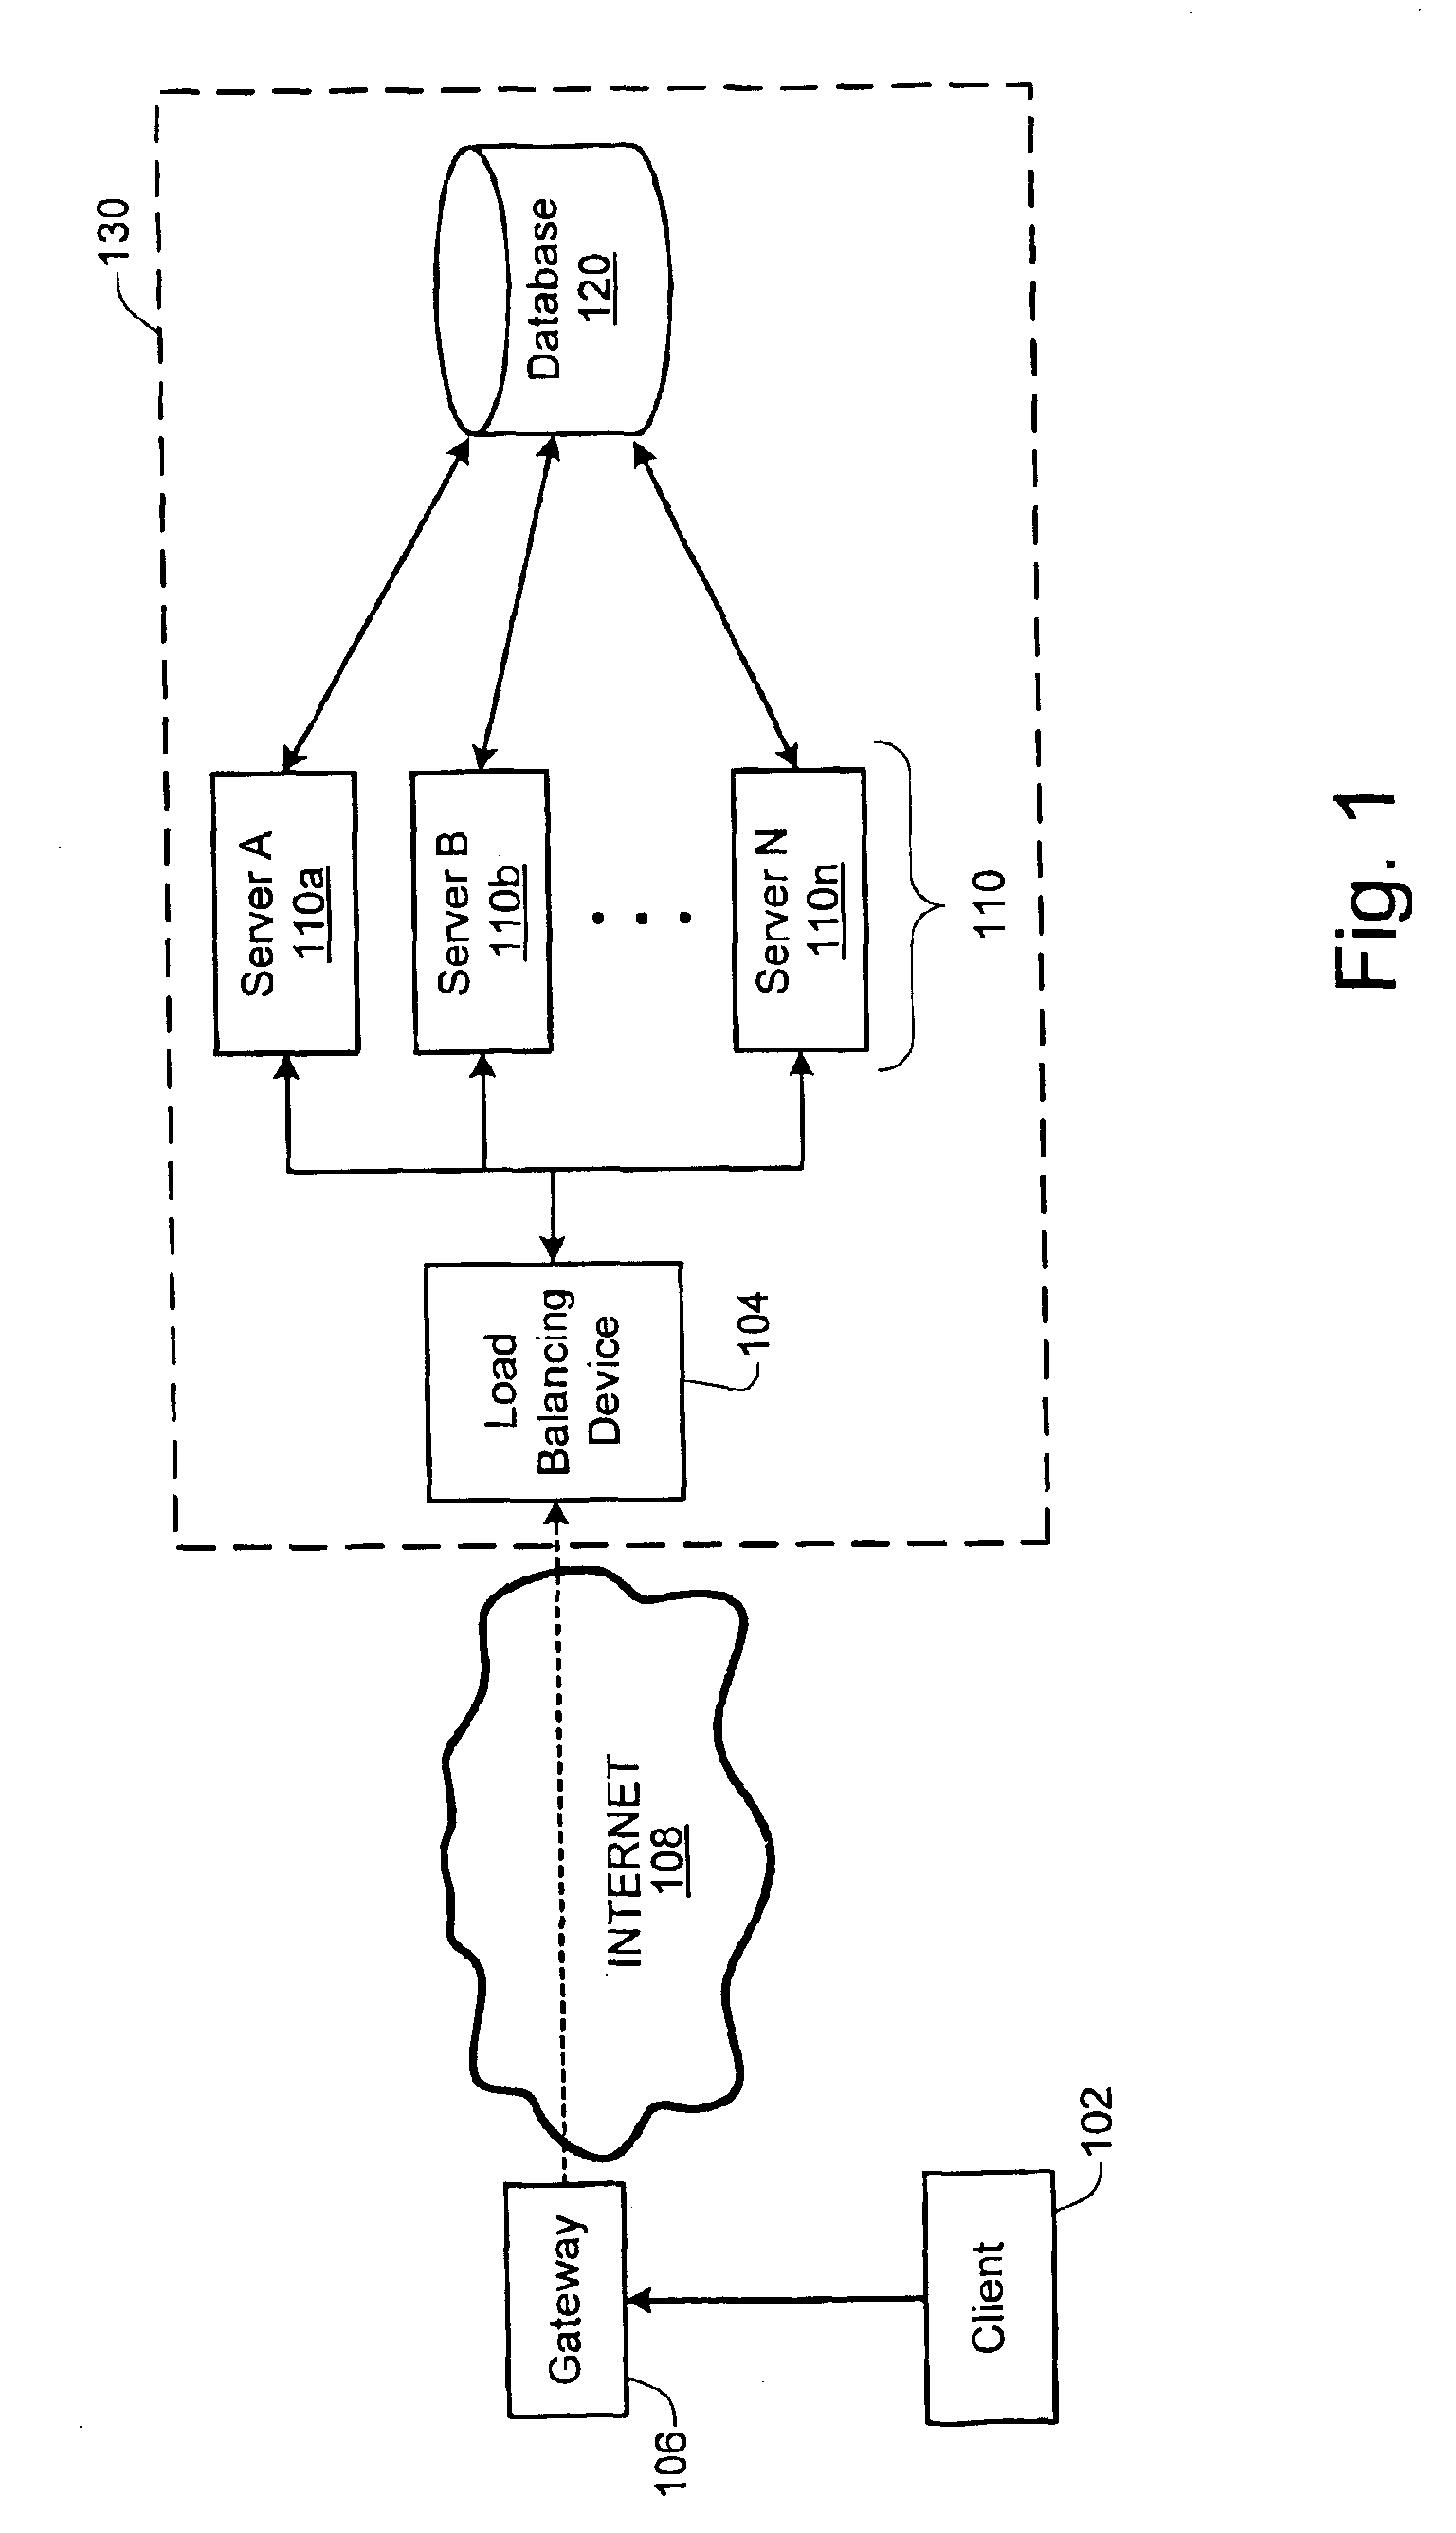 Load balancing technique implemented in a data network device utilizing a data cache